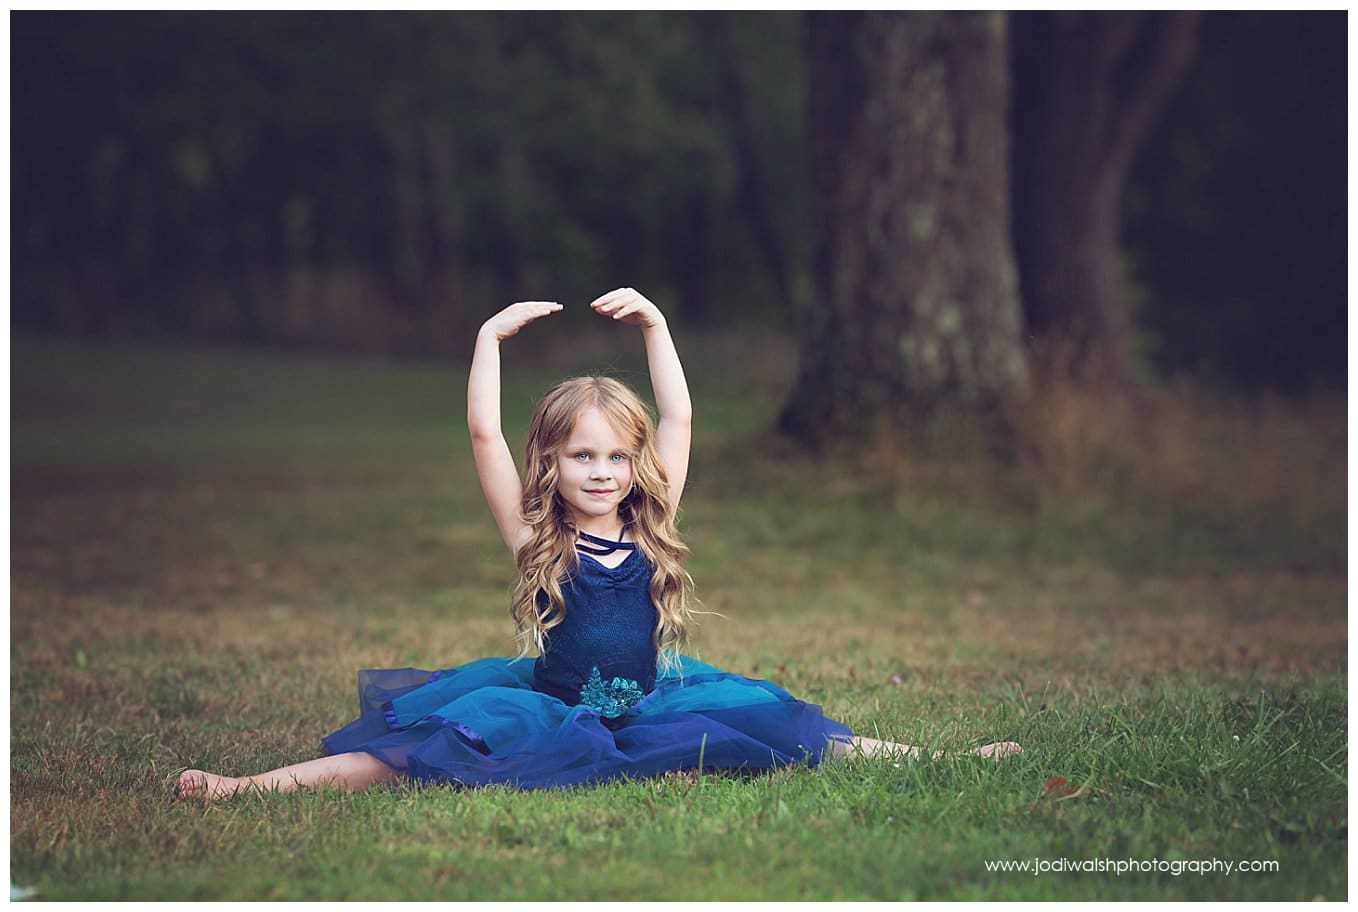 image of a little girl wearing a blue tutu and doing a split while sitting in the grass in South Park.